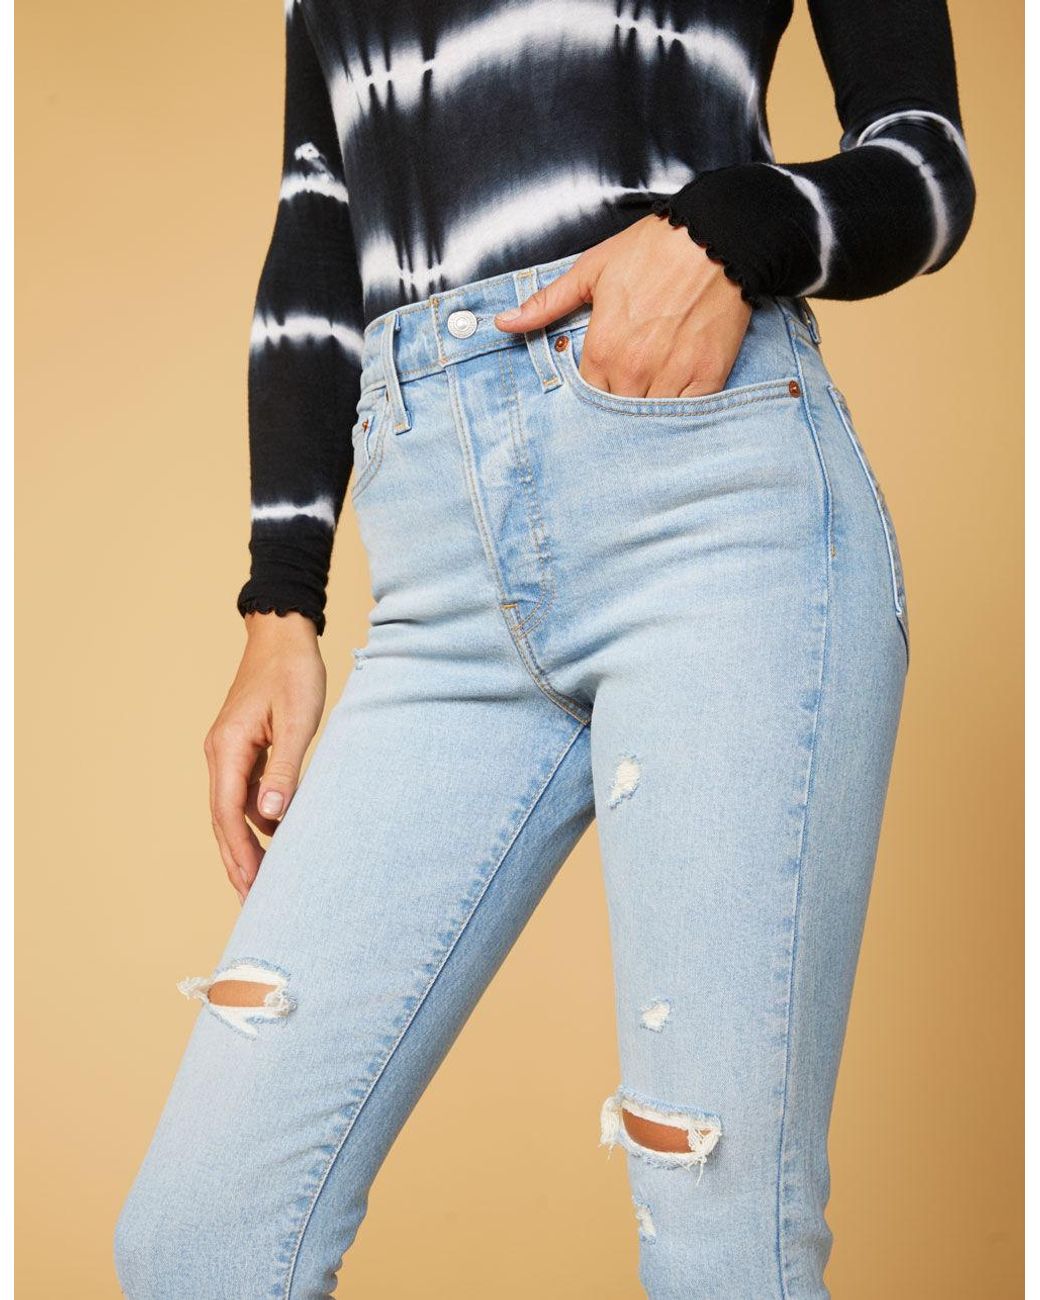 Womens Levi S Ripped Jeans Cheaper Than Retail Price Buy Clothing Accessories And Lifestyle Products For Women Men